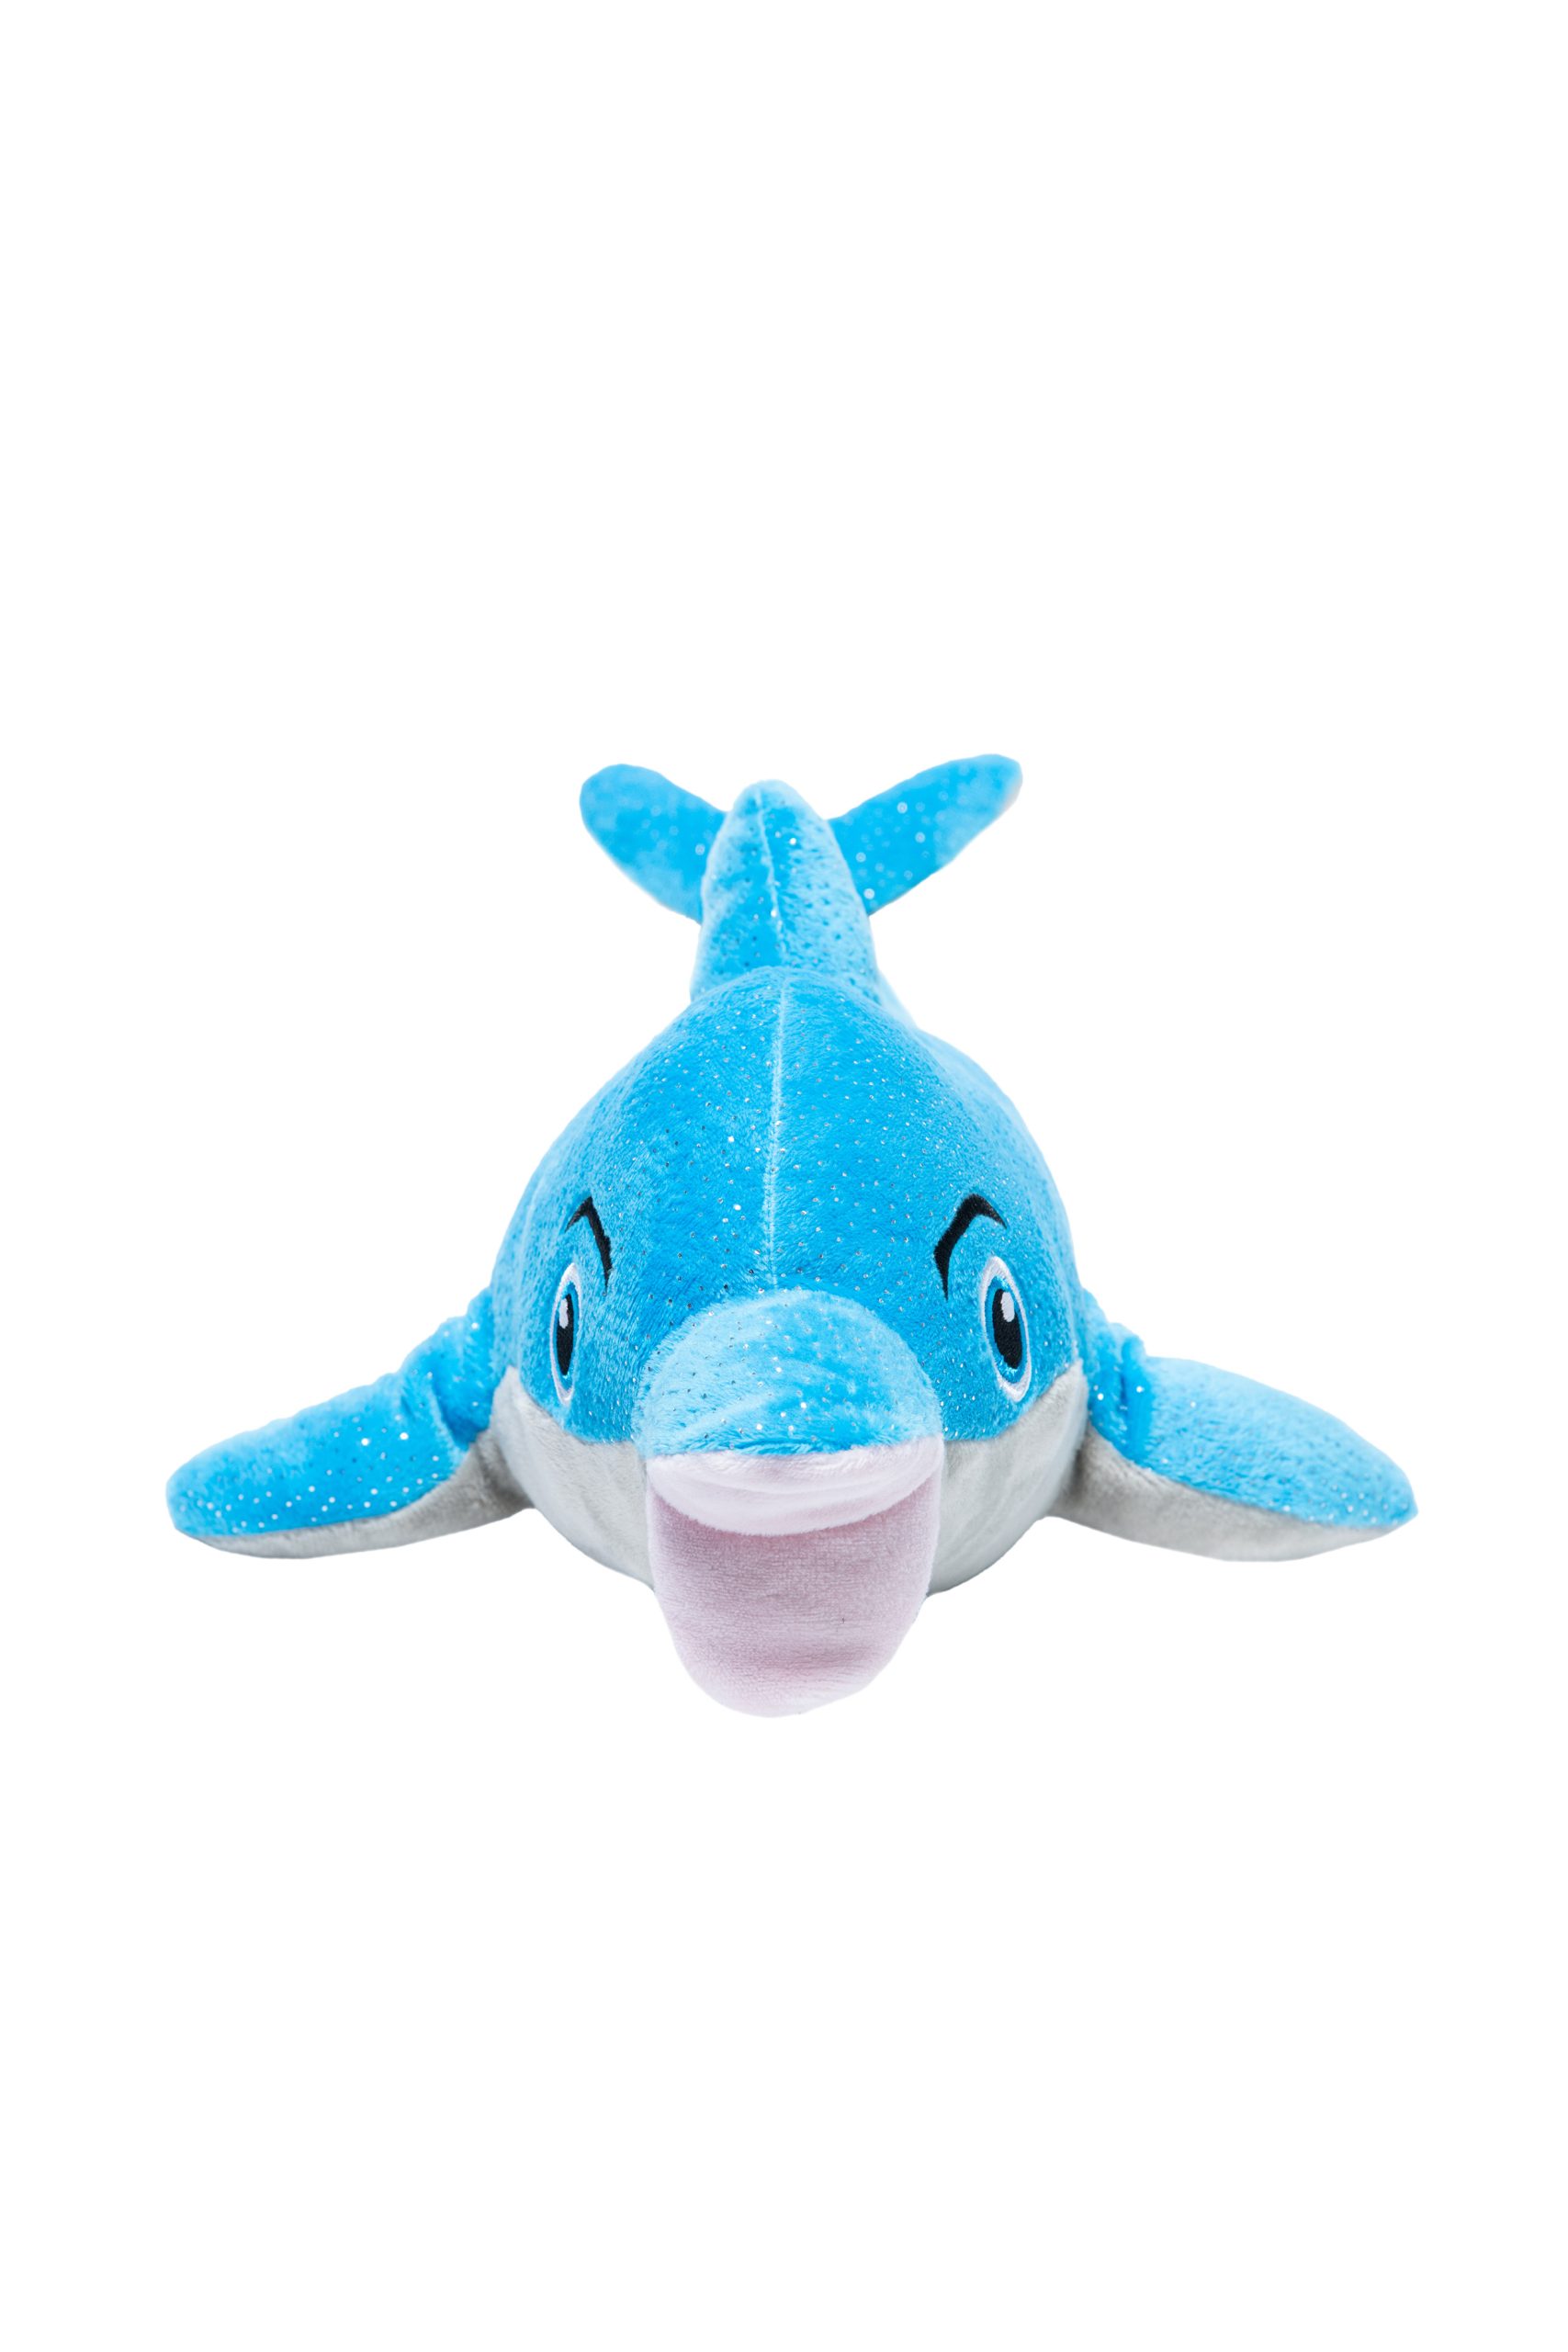 15" Dancer Dolphin (PRESALE ONLY)